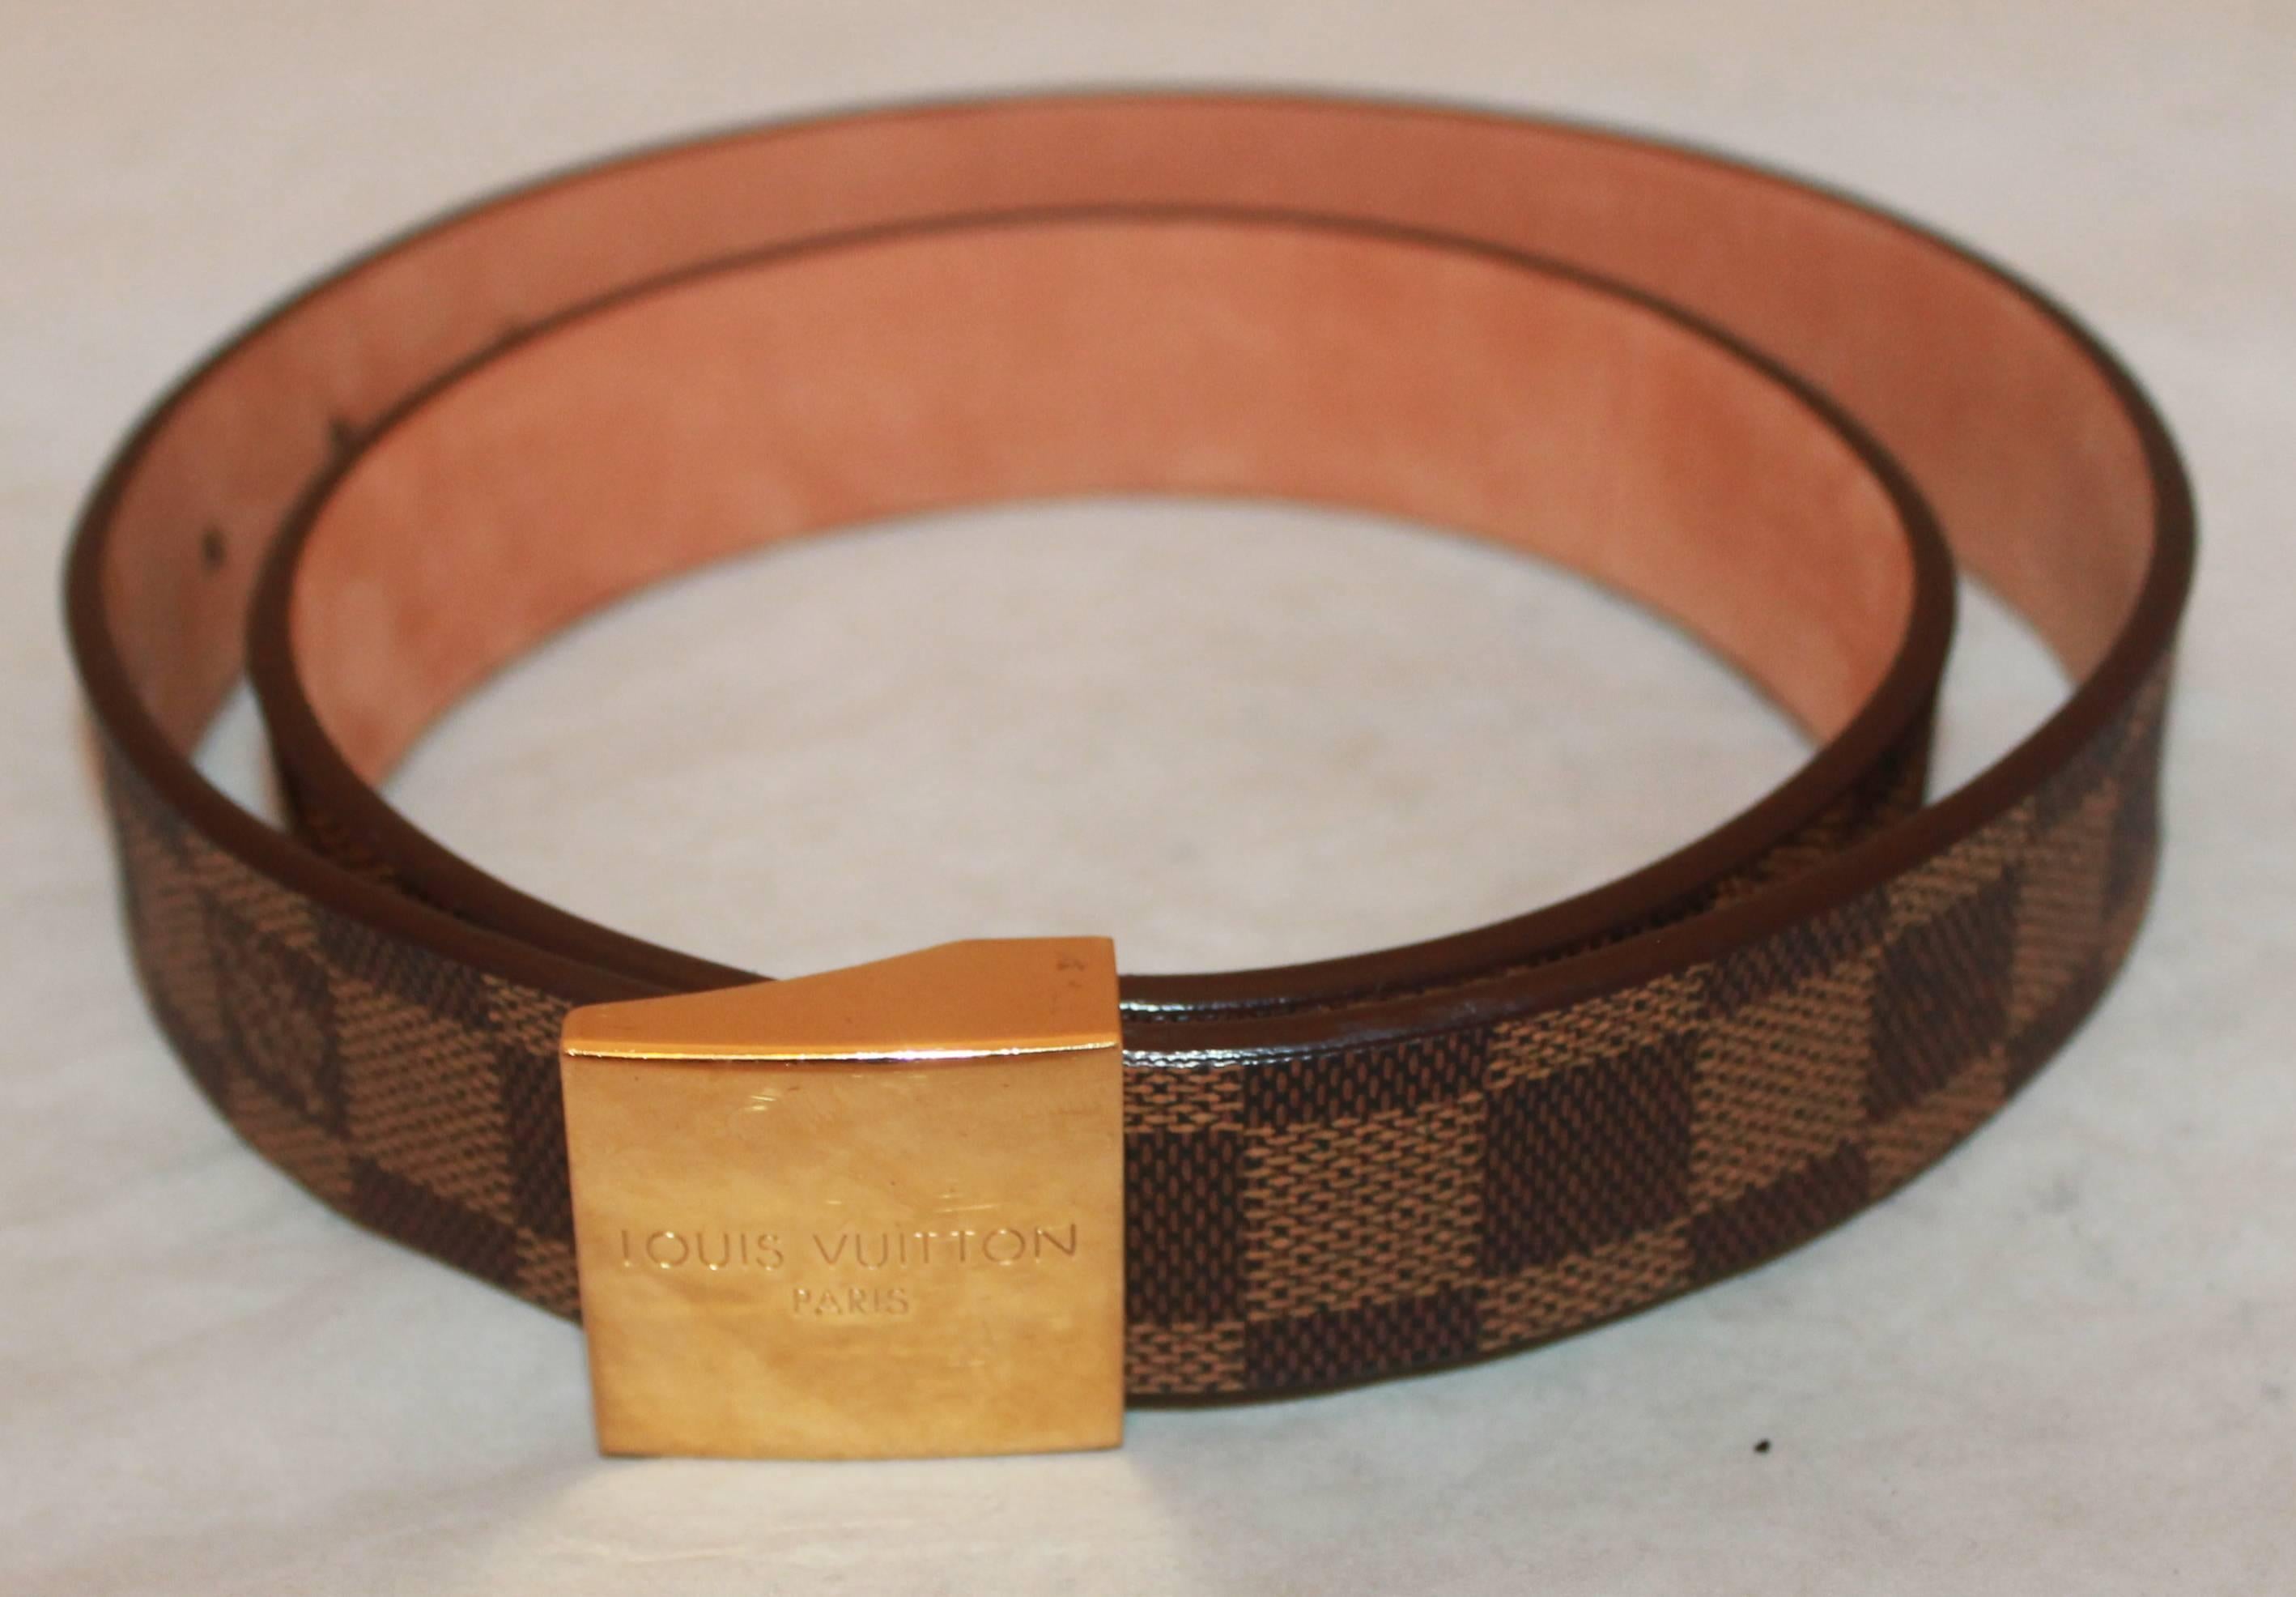 LV Optic 40mm Reversible Belt Other Leathers - Accessories M0226U